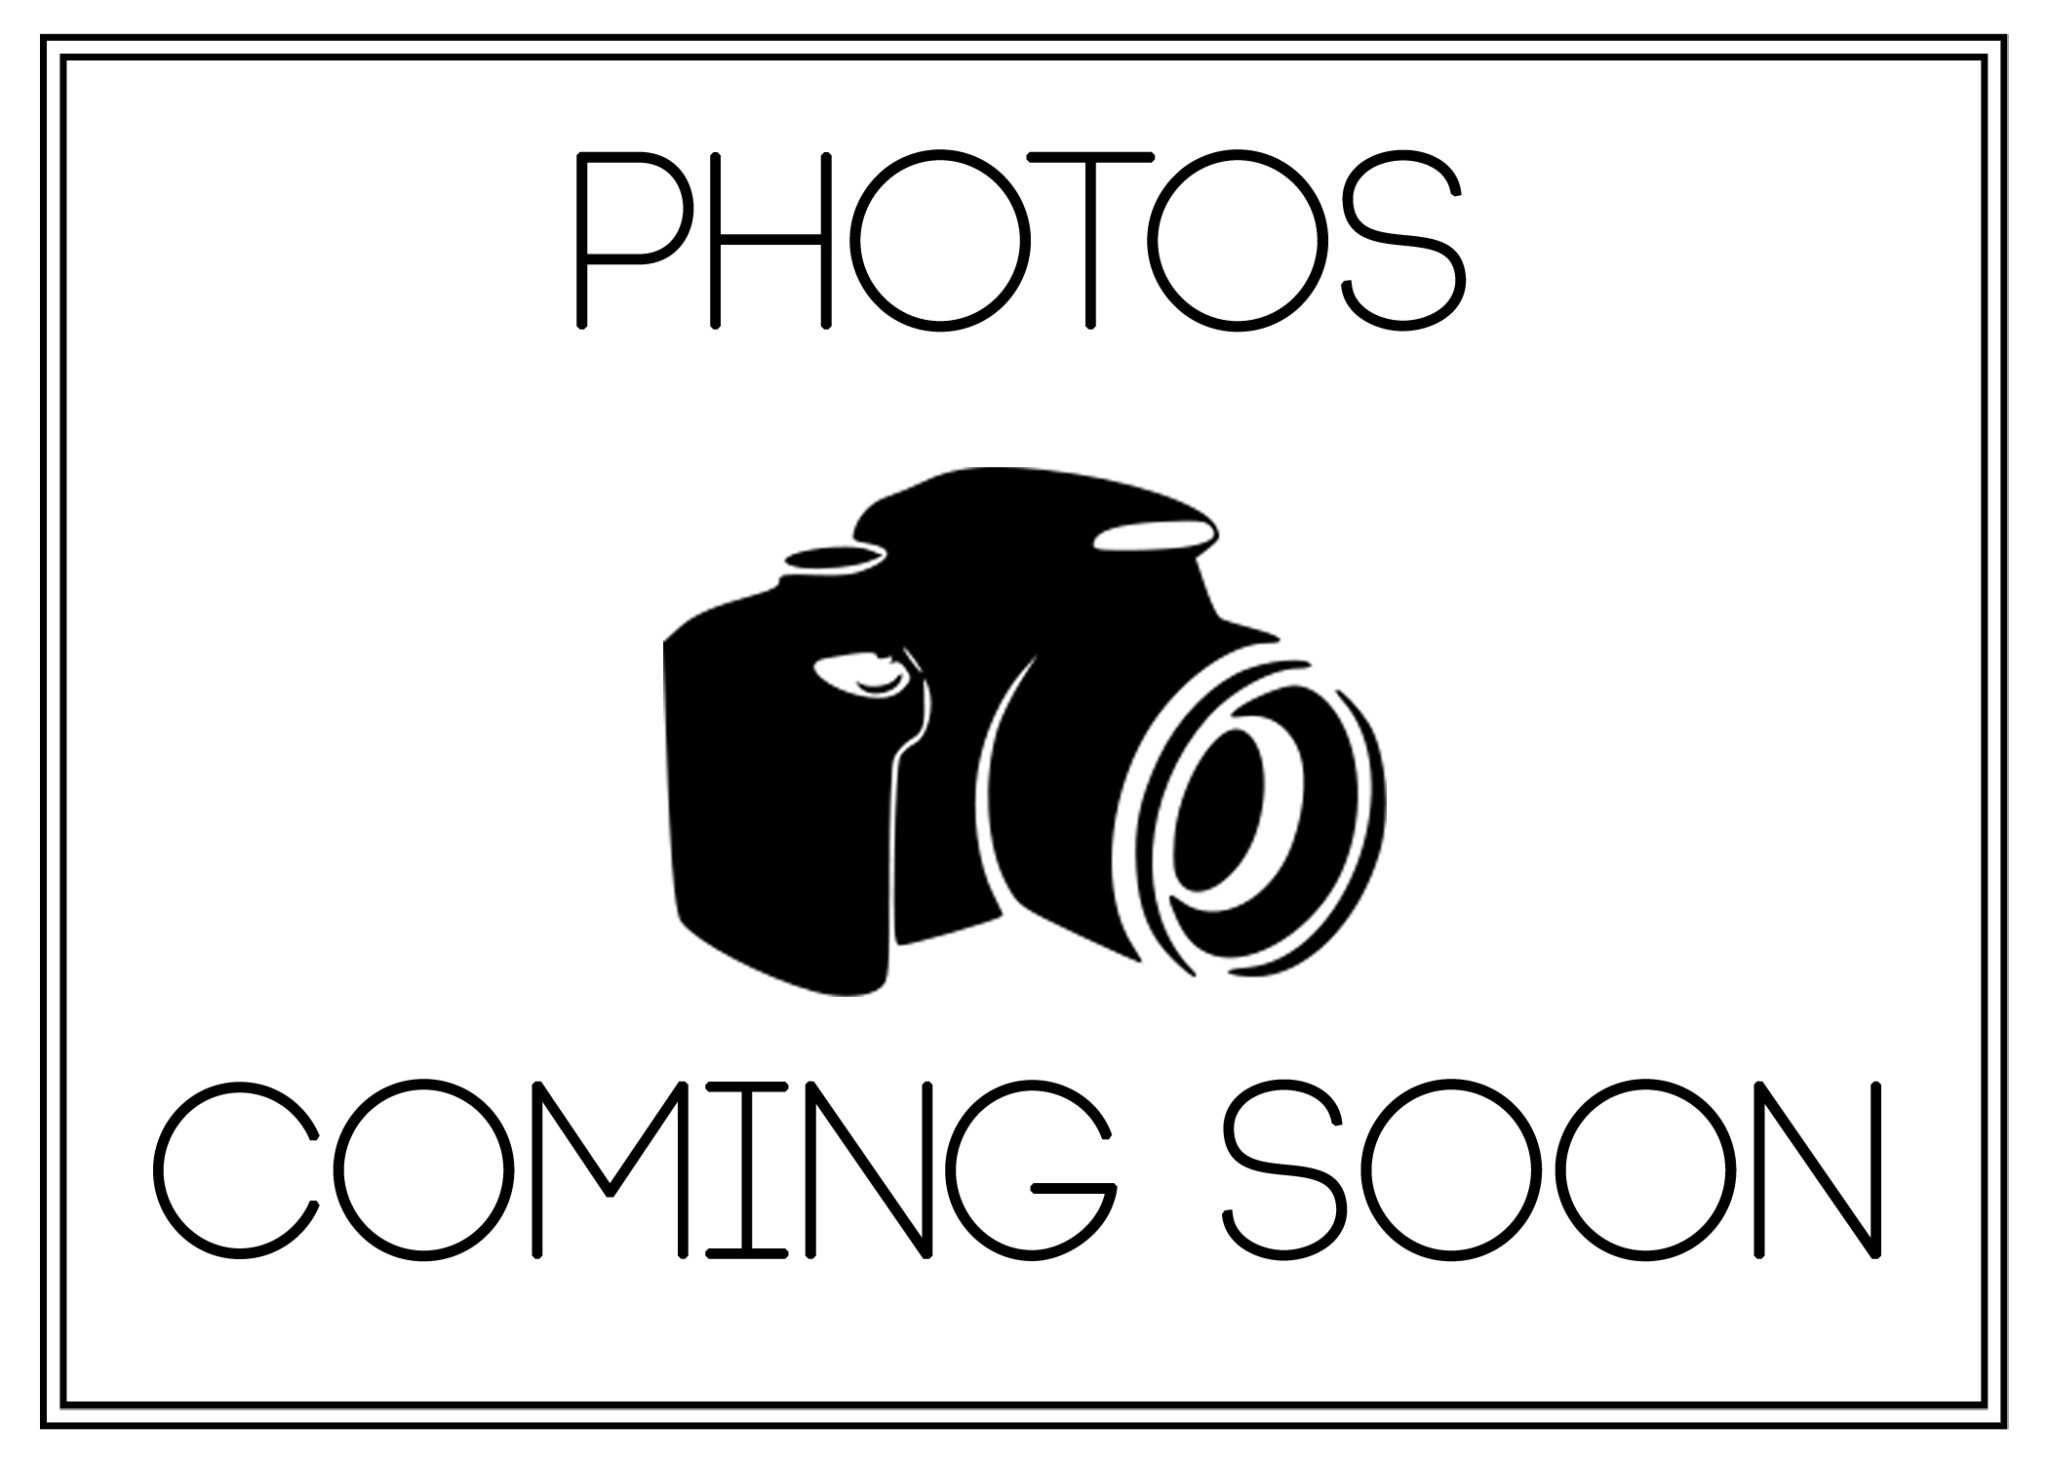 Photos Coming Soon - South Pointe Apartments & Rental Homes